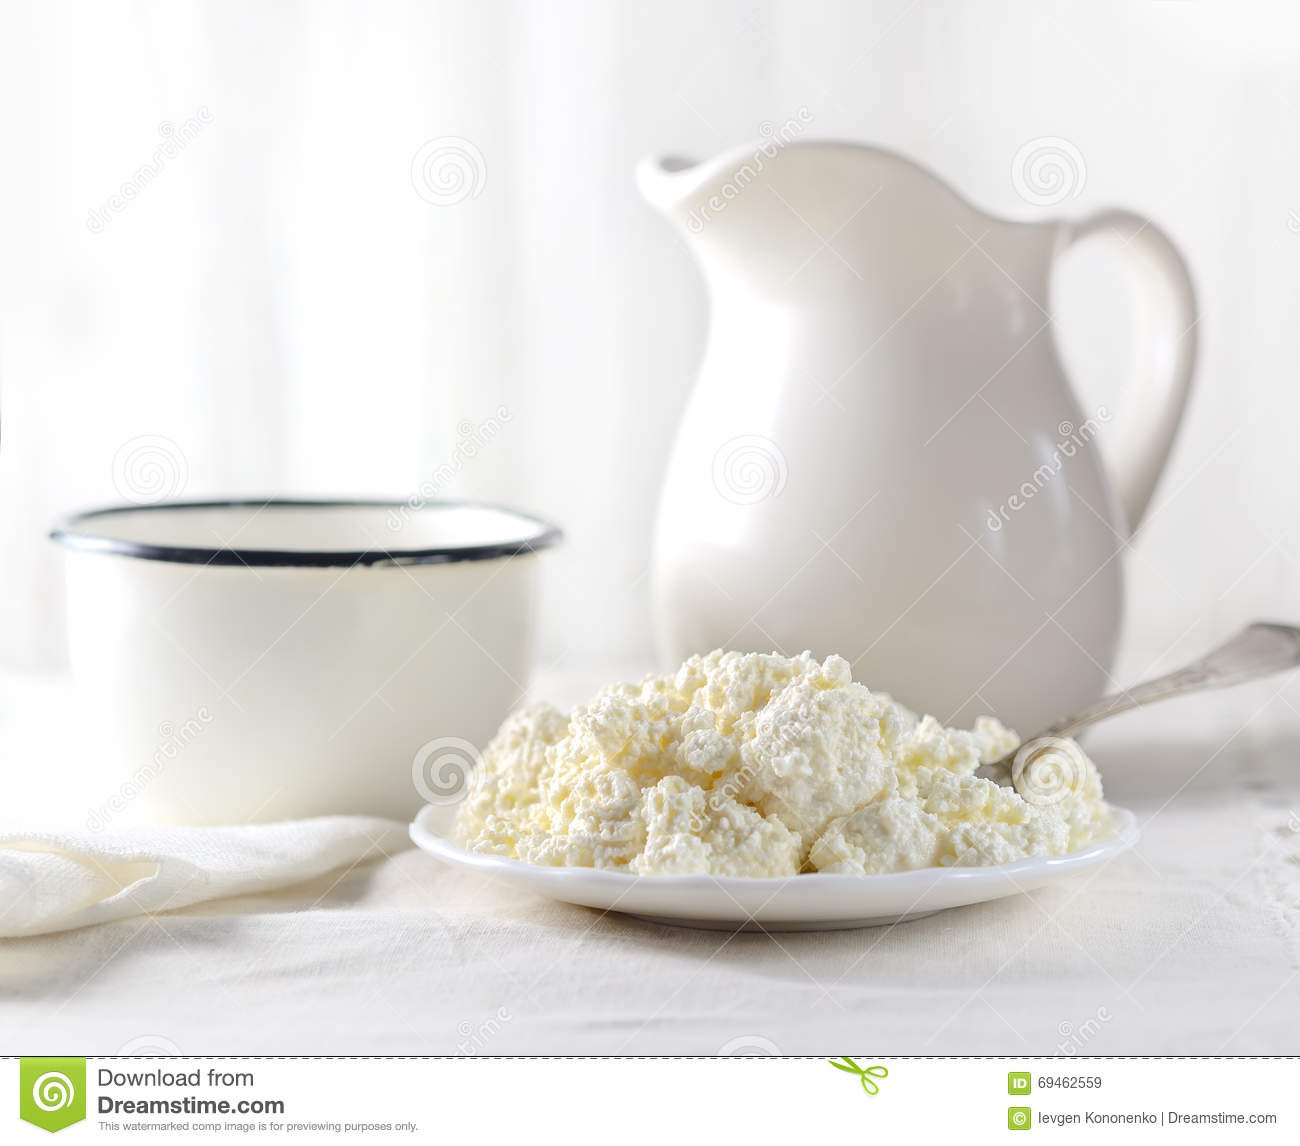 26 Lovely White Milk Jug Vase 2024 free download white milk jug vase of dish of cottage cheese a mug and a milk jug on a white background with dish of cottage cheese a mug and a milk jug on a white background